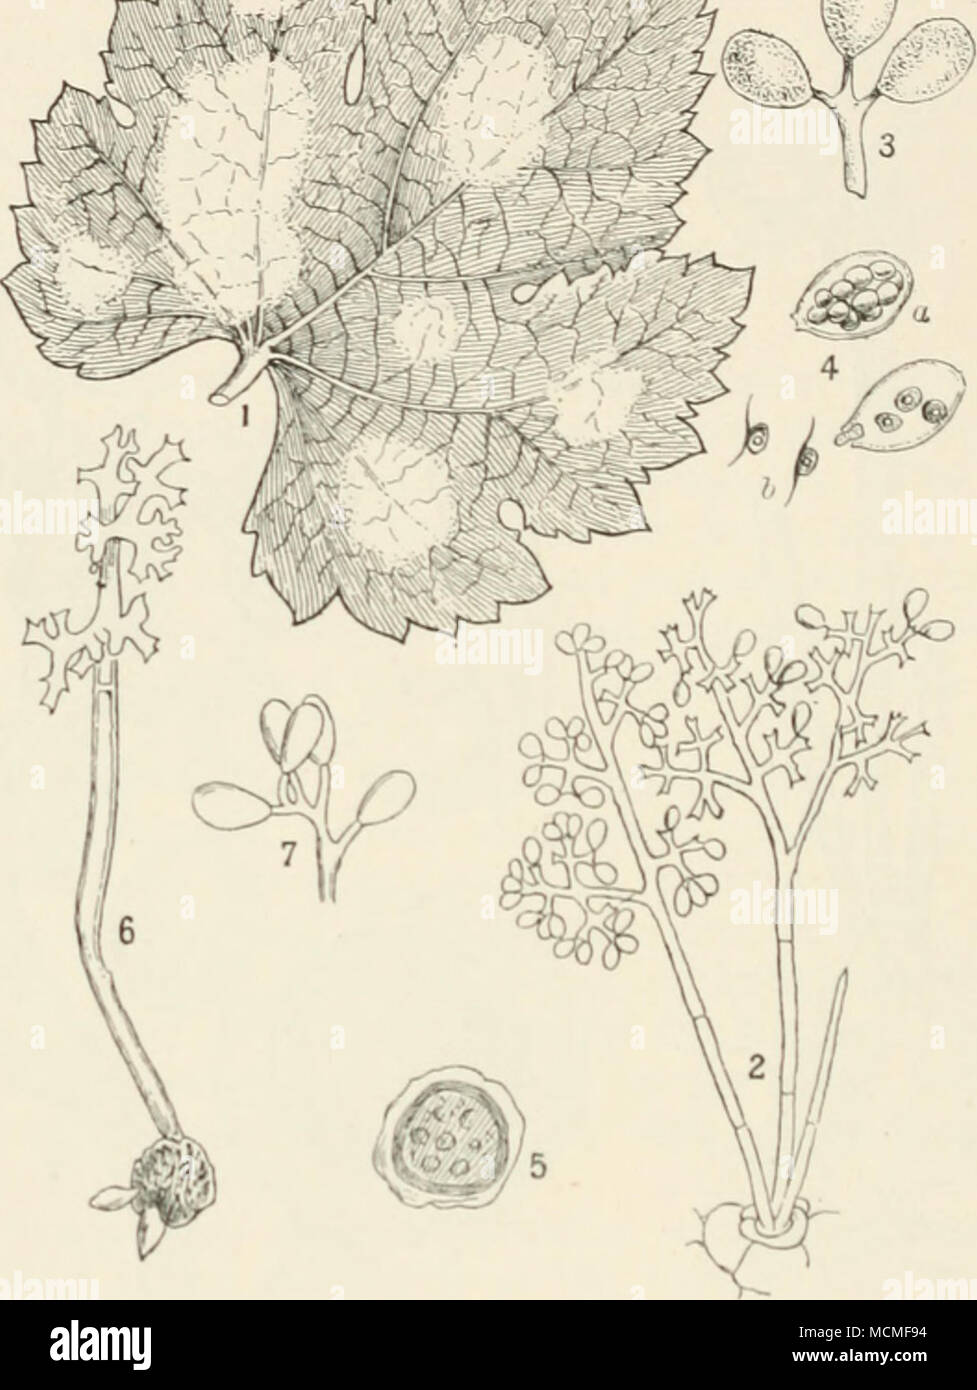 . Fig. 26.—Plasmopara viticola. i, under surface of a vine leaf showing white patches of mildew ; 2, group of conidiospores bearing numerous conidia ; 3, three conidia more highly mag.; 4, conidia containing zoospores, in b, two zoospores have escaped from the conidium ; 5, mature oospore or nsting-spore ; 6, an oospore germinating and producing a conidiopiiore (after Prillieu.x) ; 7, autumnal form of conidiophore bearing a few large conidia (after Prillieu.x). Fig. i reduced, remainder highly mag. Oospores are produced in abundance in the dying portions of the plant. When a plant is attacked, Stock Photo